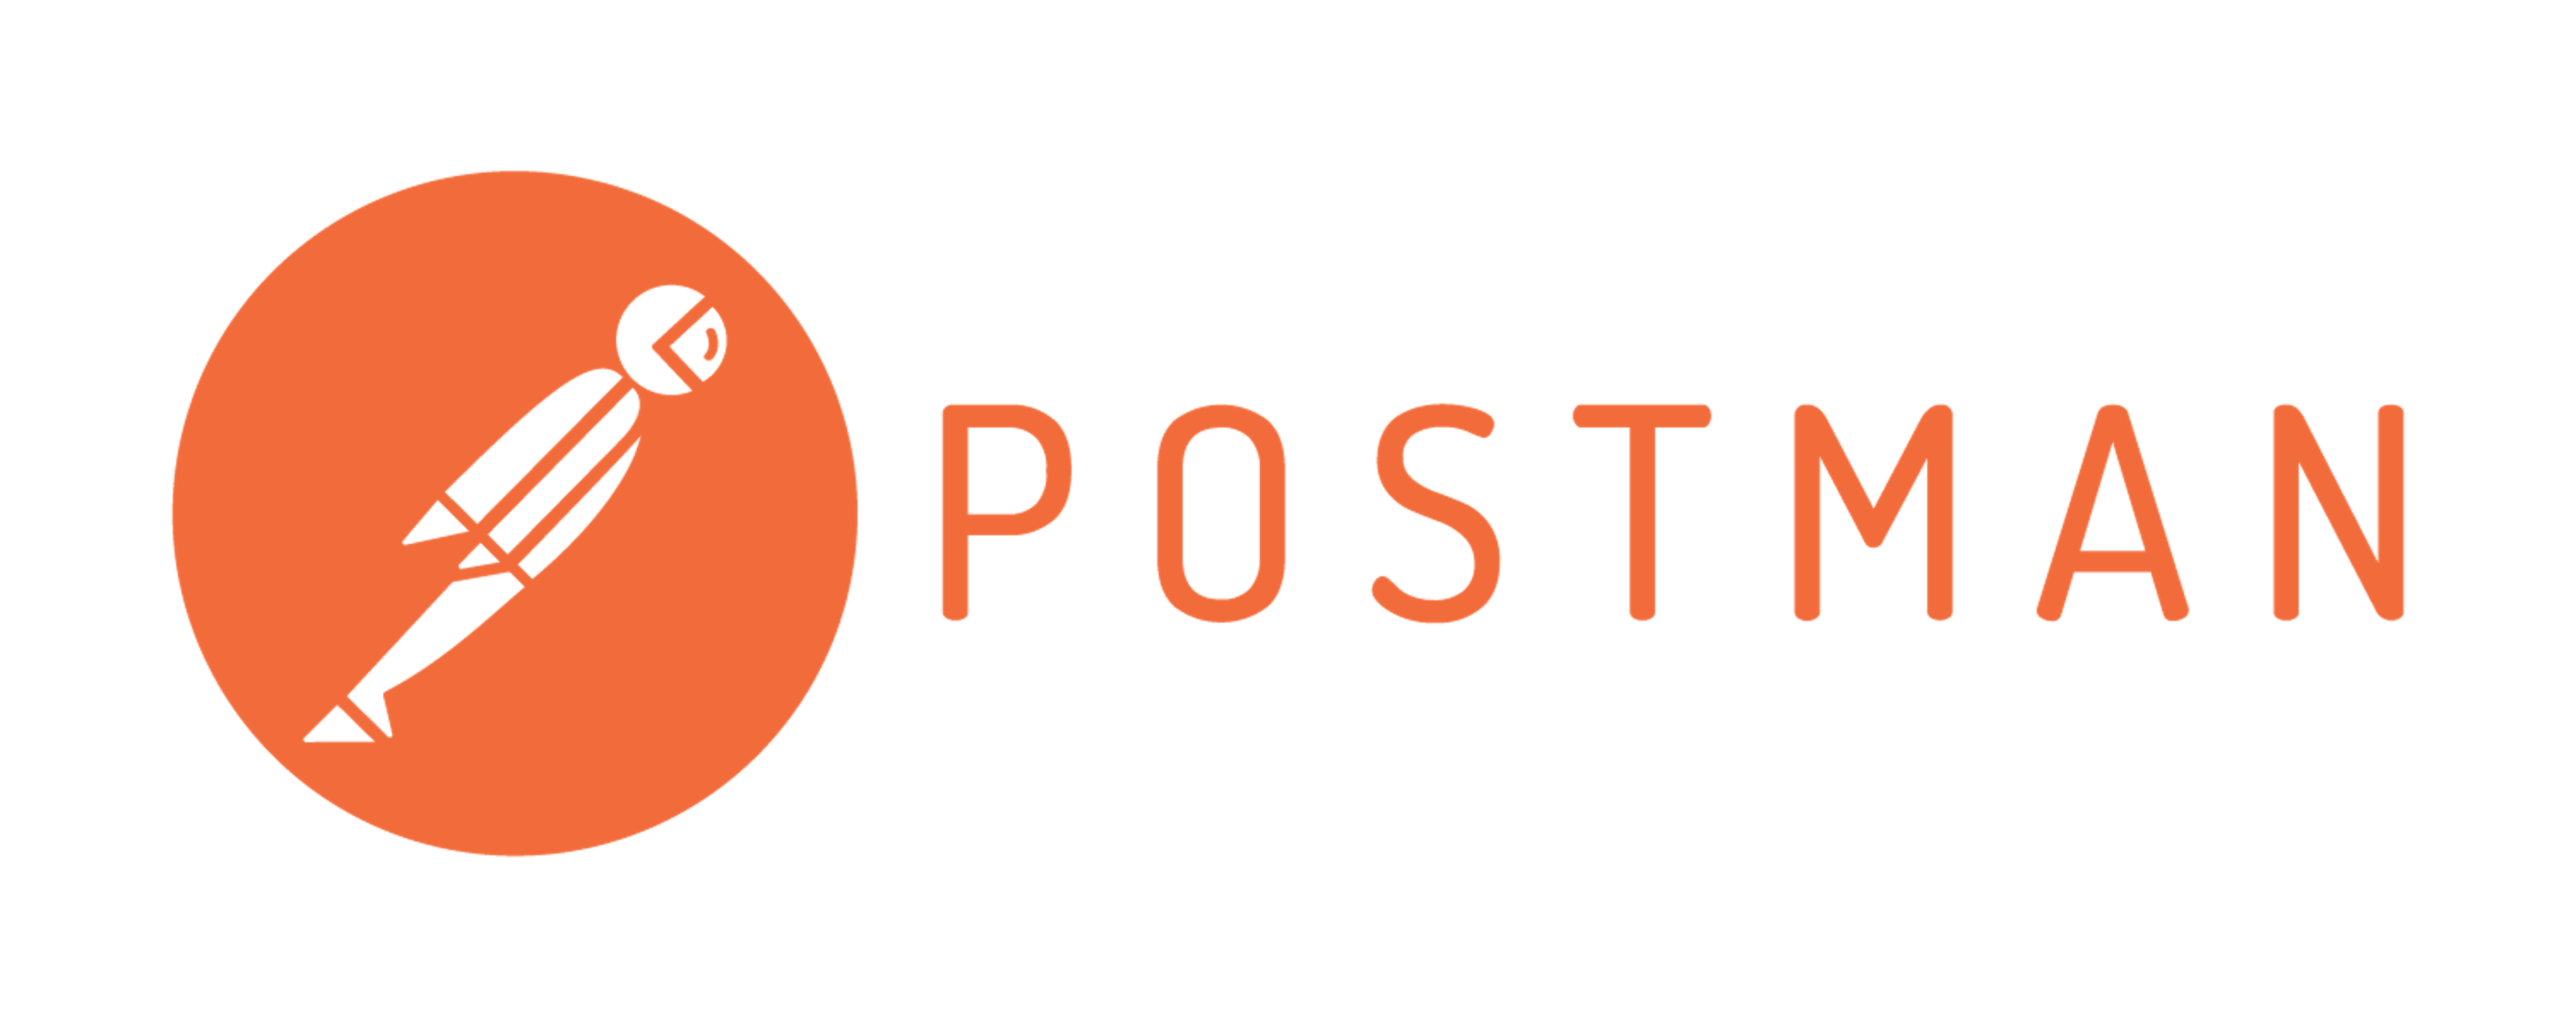 /configuring-multi-cluster-setup-in-postman-skw315v feature image